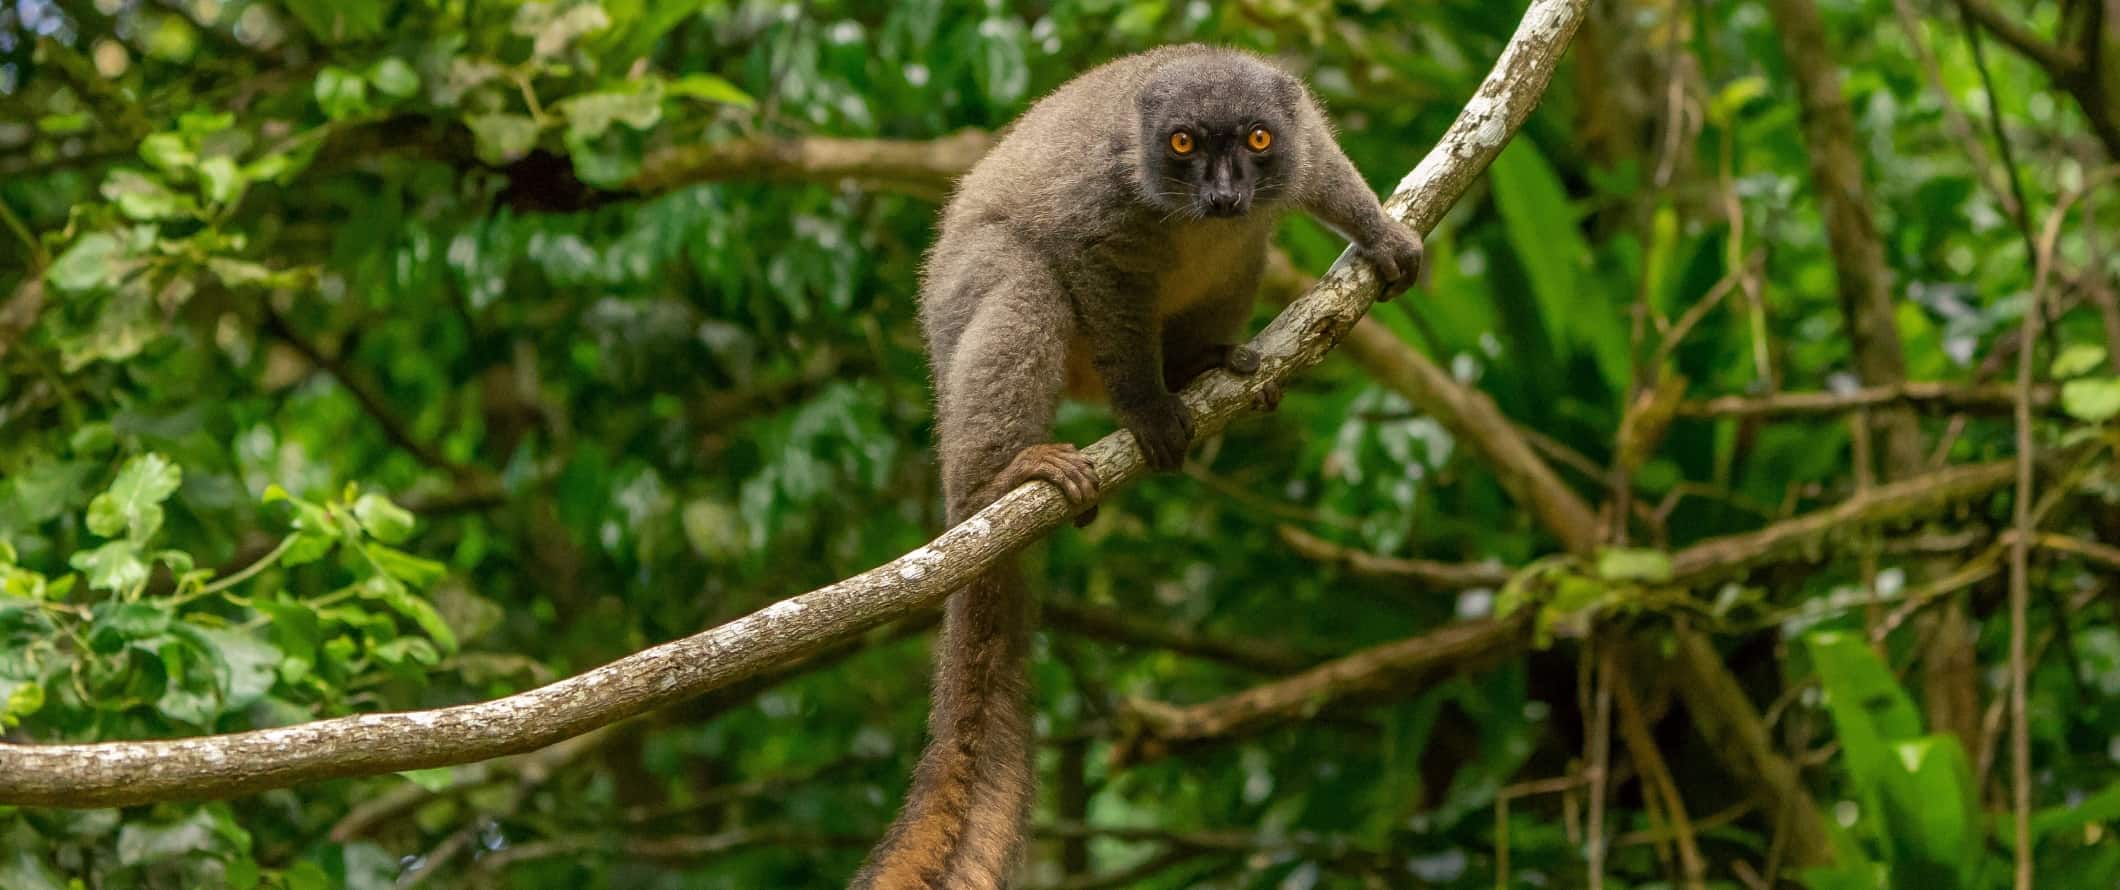 A wide-eyed lemur in a tree, staring at the camera in Madagascar, Africa